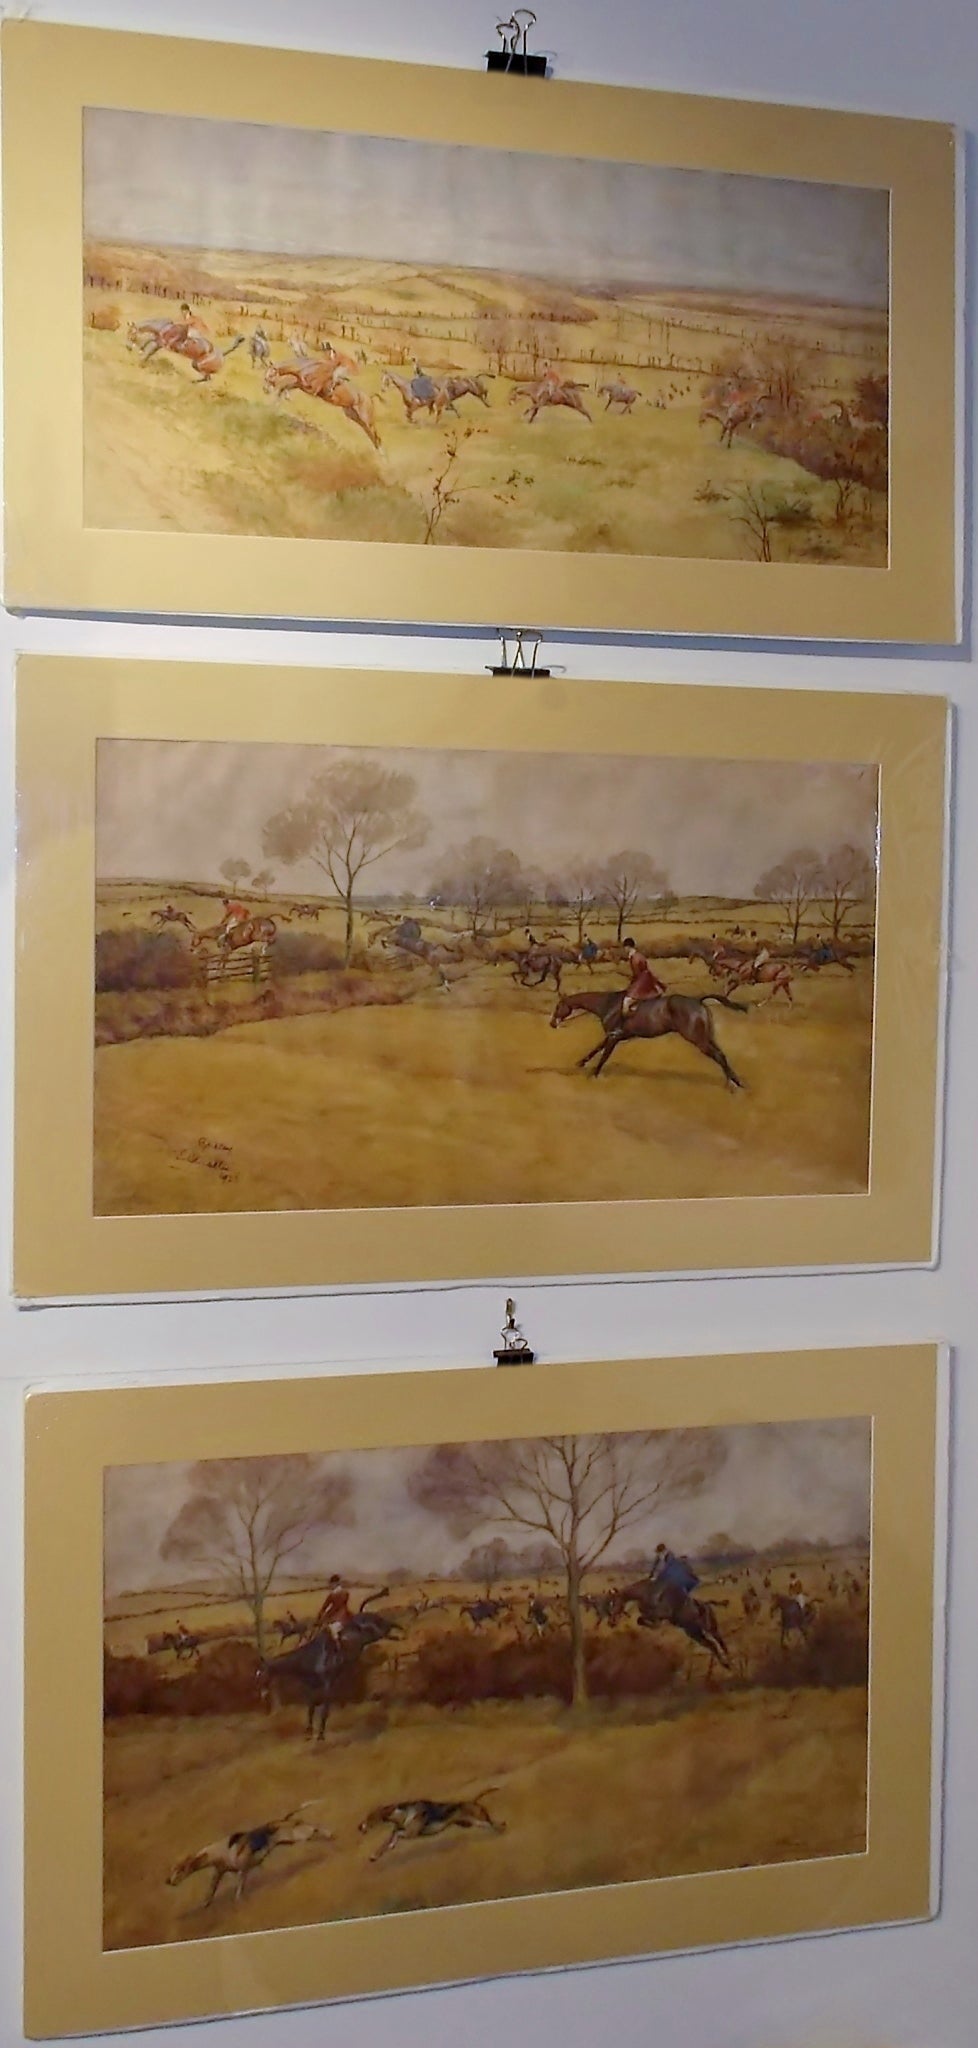 E. Blocaille "Pytchley Hunt" English Hunting Watercolors